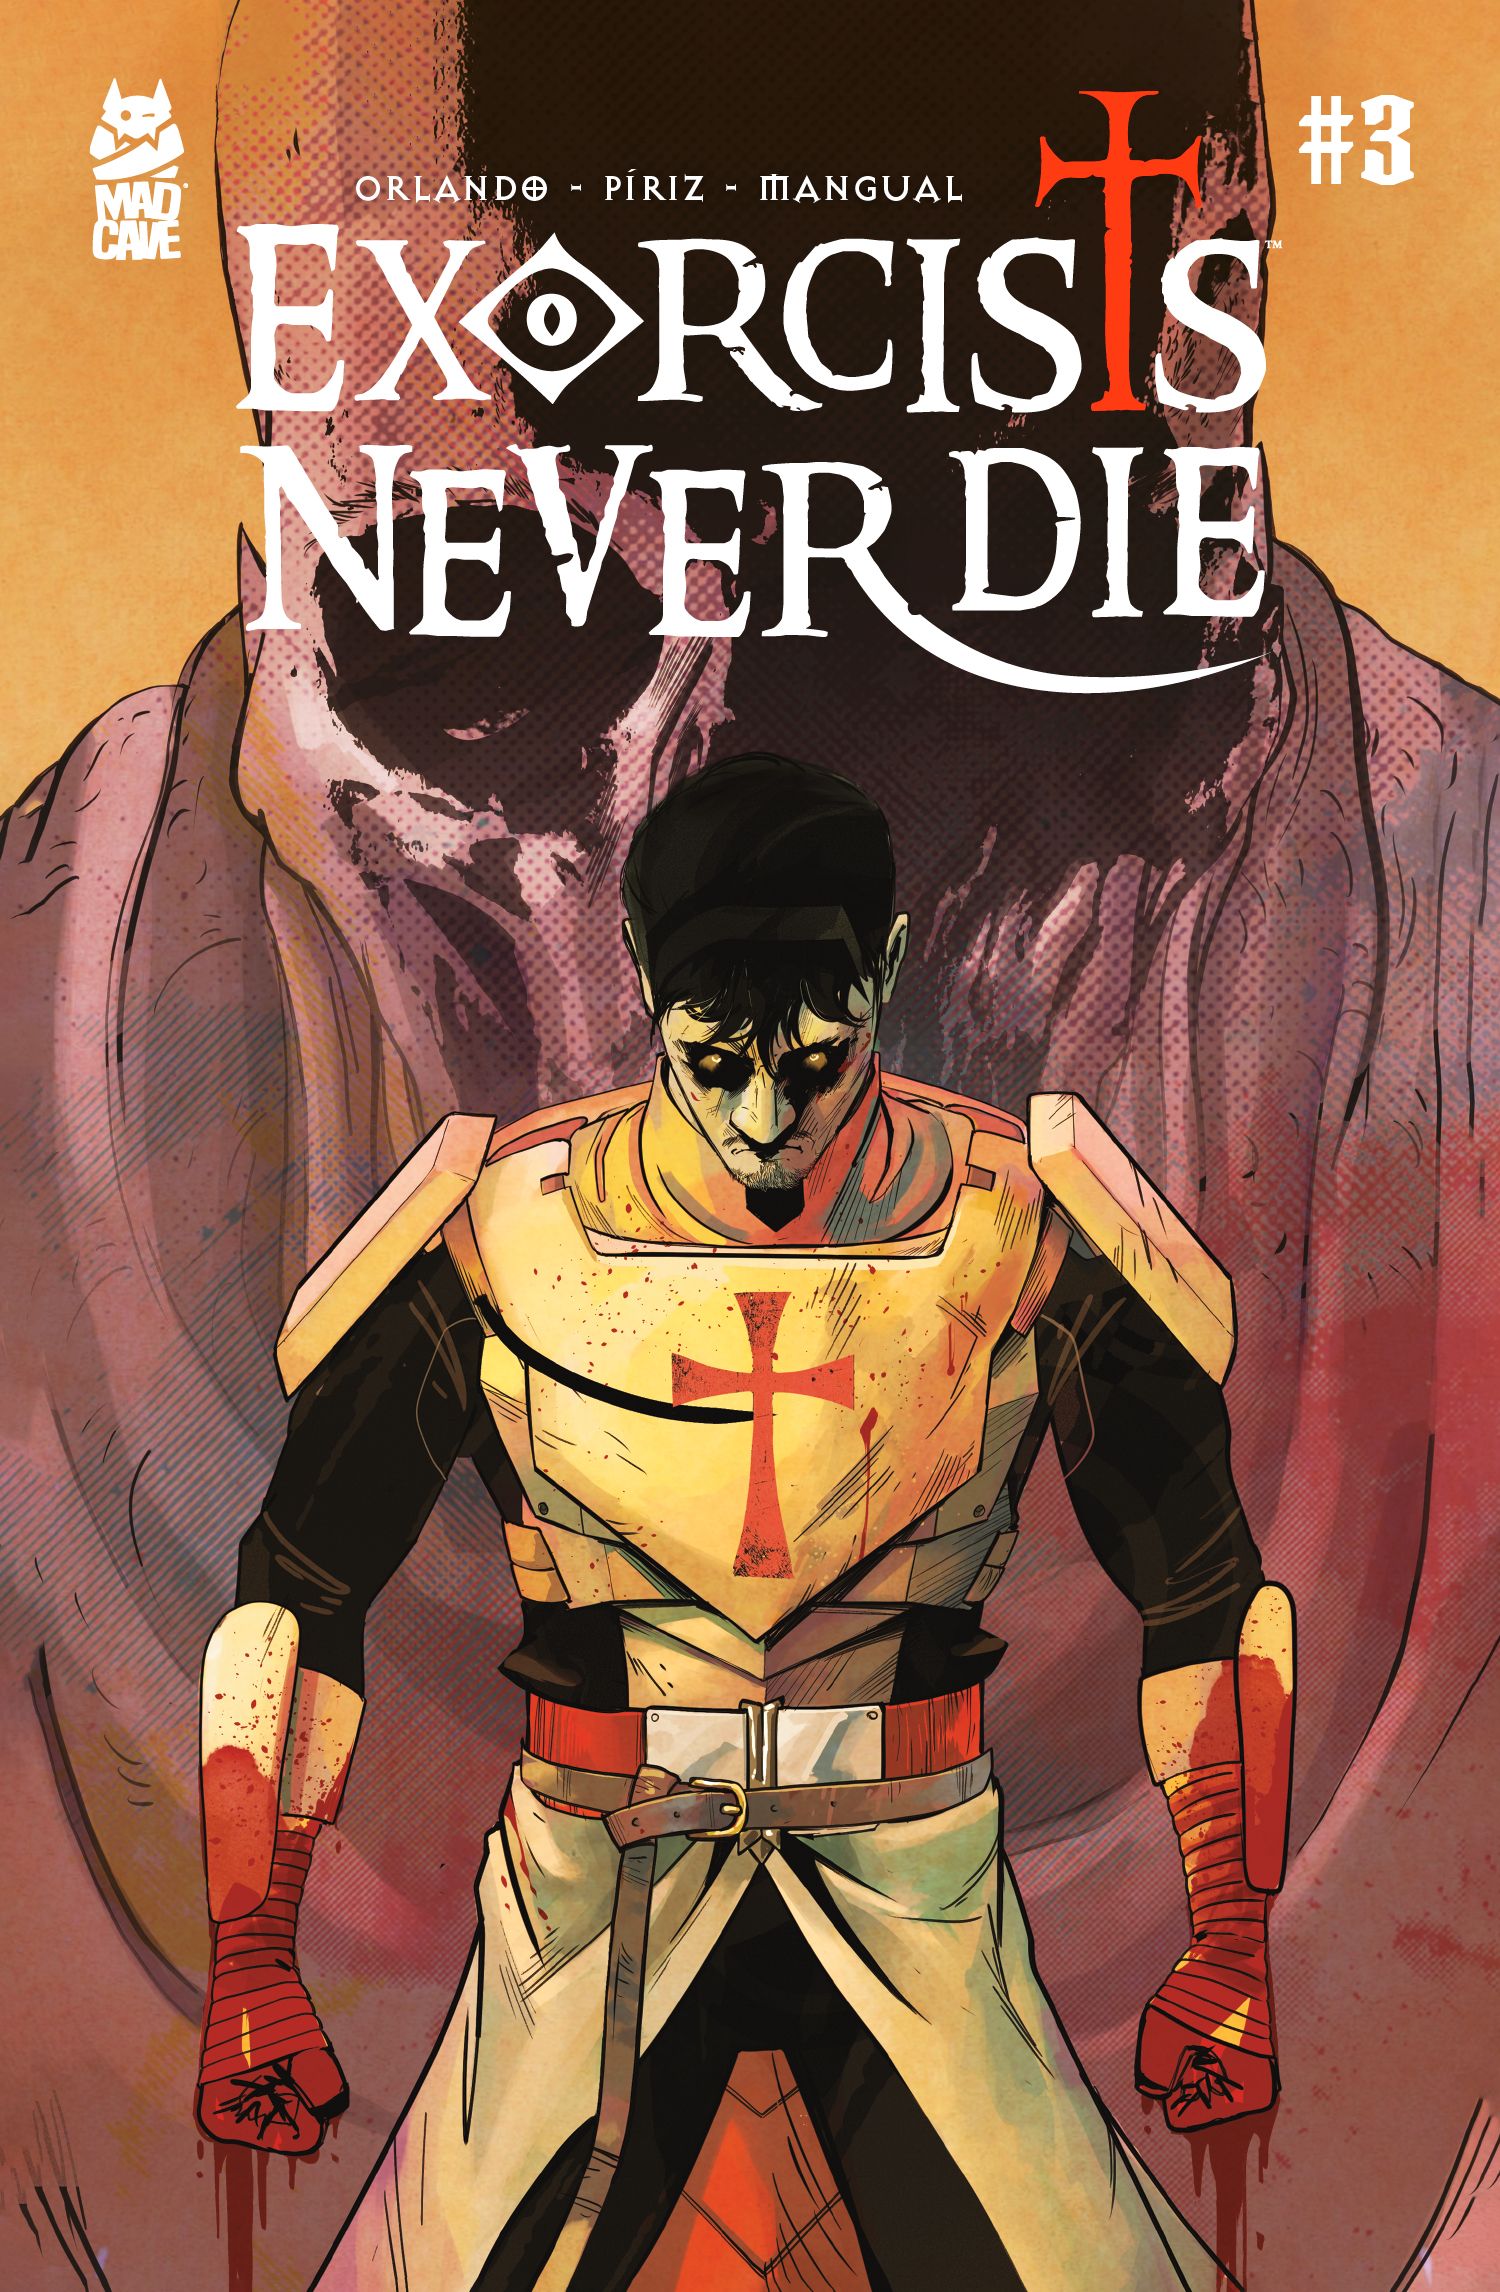 Exorcists Never Die #3 Comic